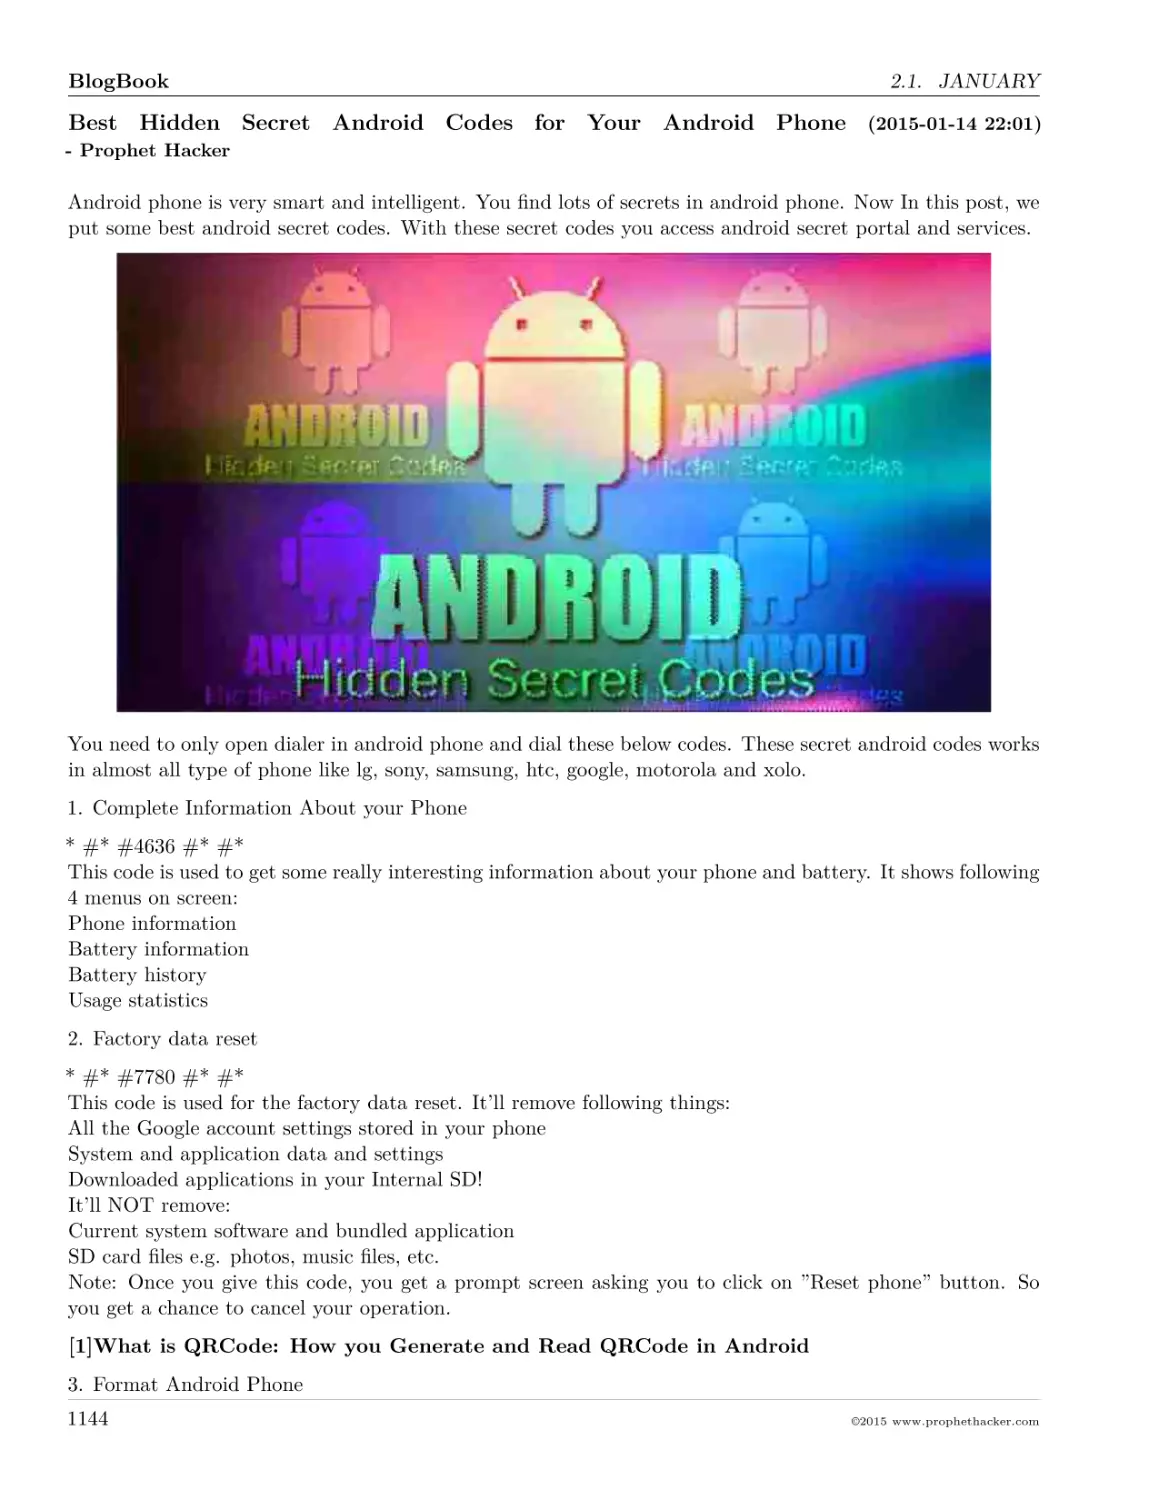 Best Hidden Secret Android Codes for Your Android Phone (2015-01-14 22